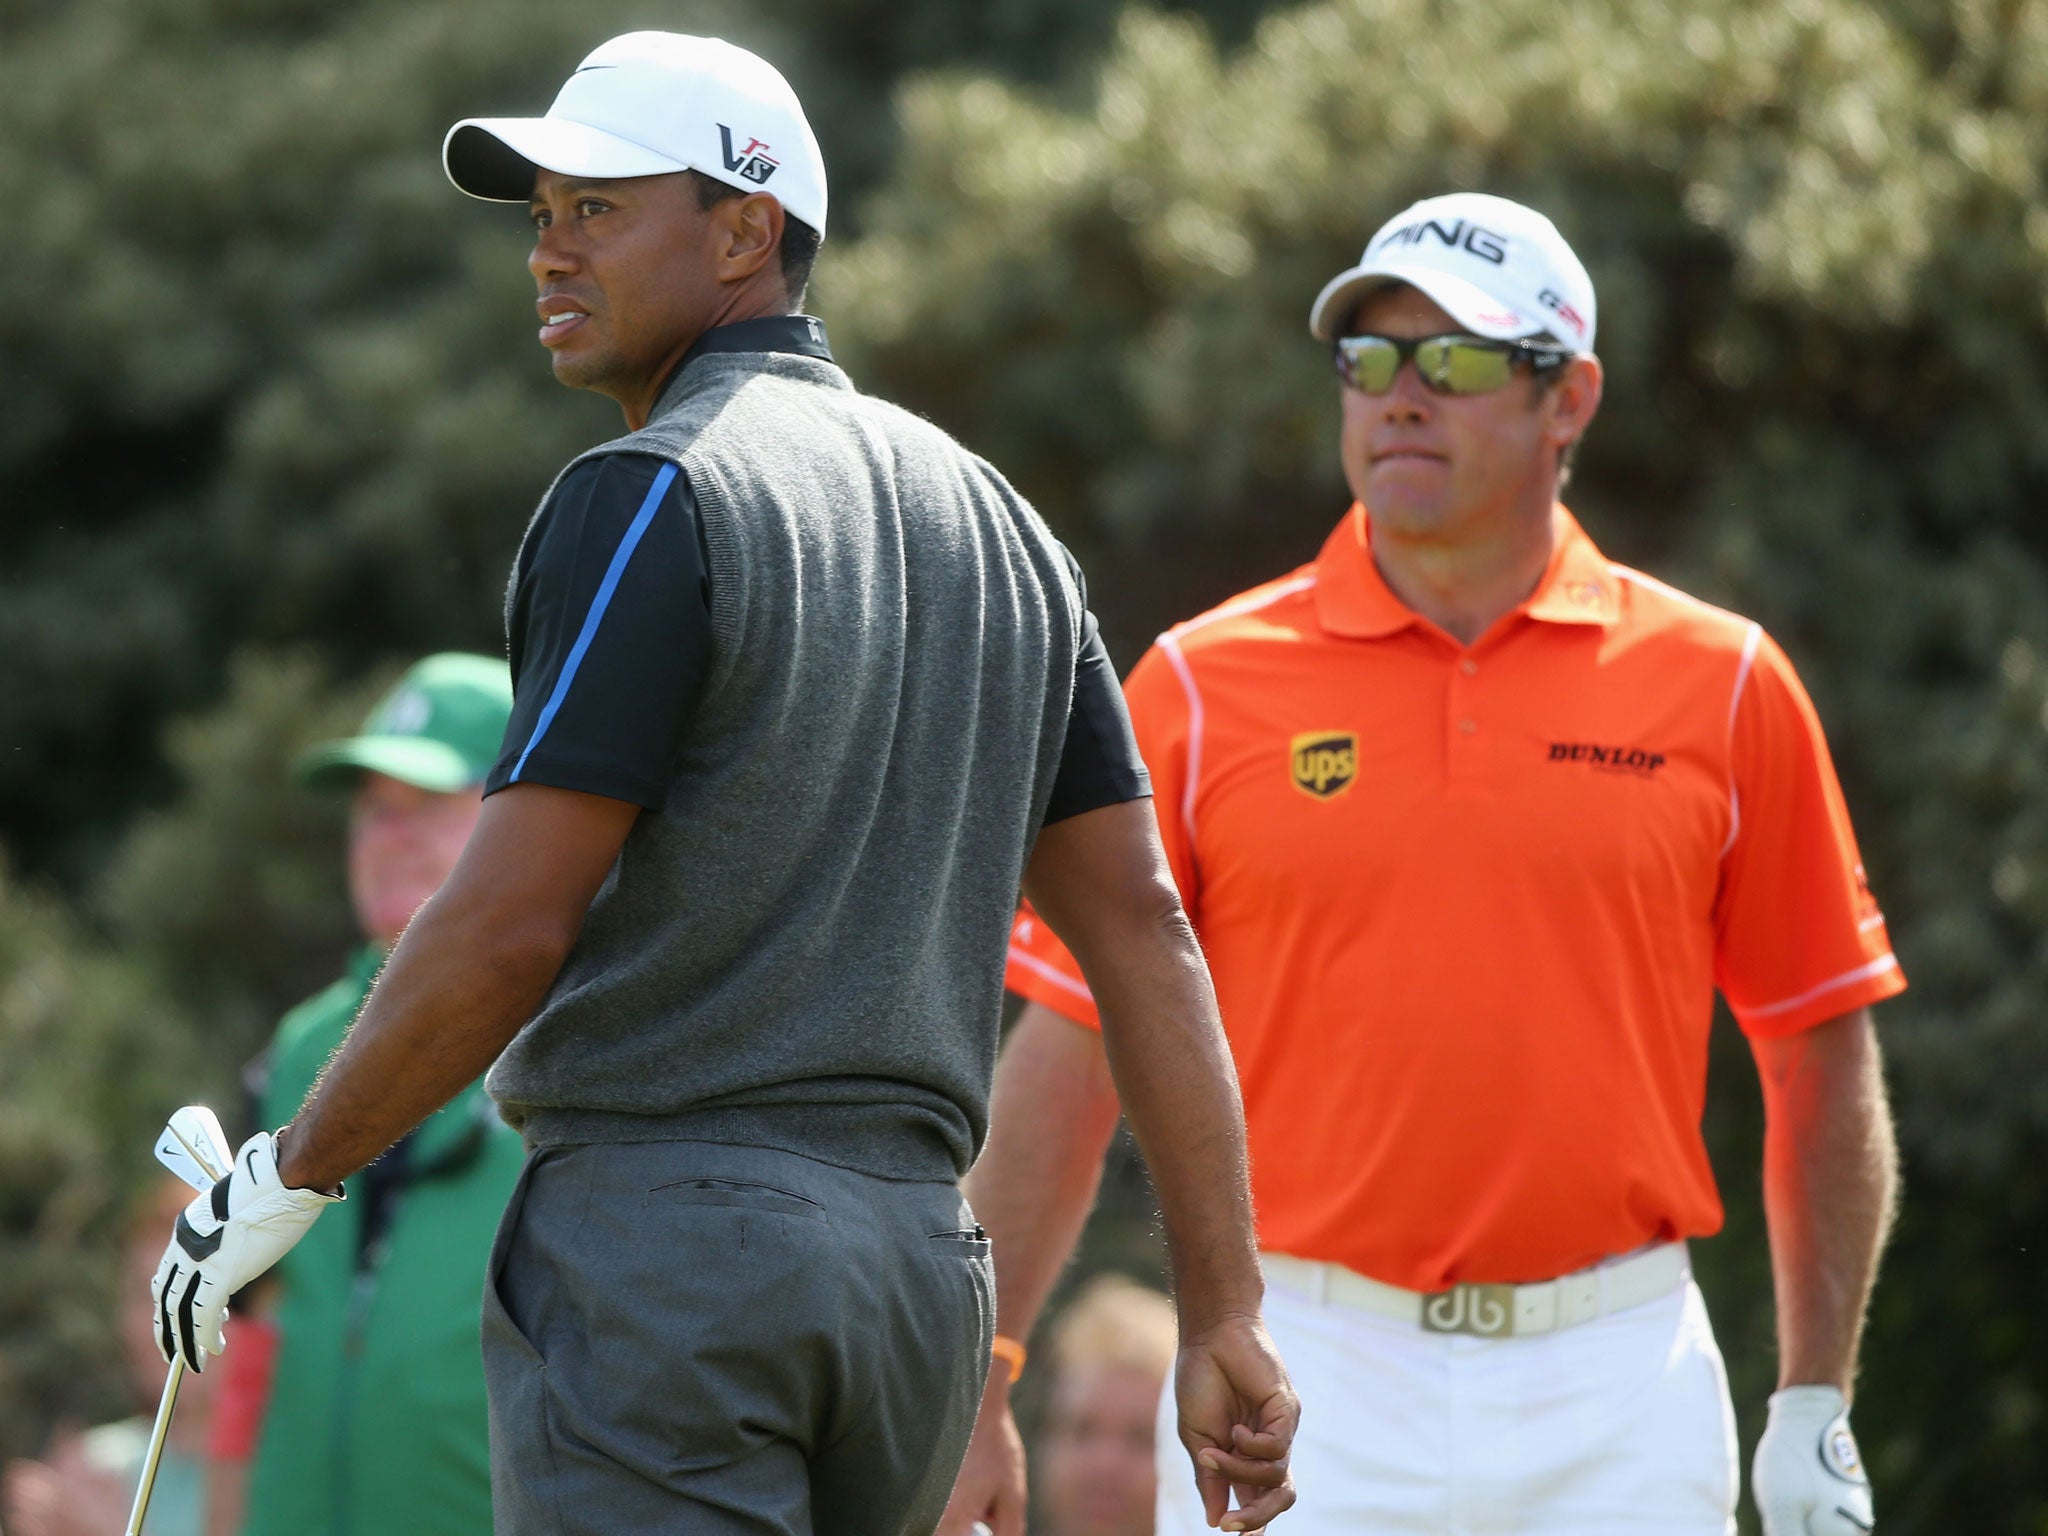 Crouching tiger: Lee Westwood ended the third round two shots ahead of world No 1 Tiger Woods